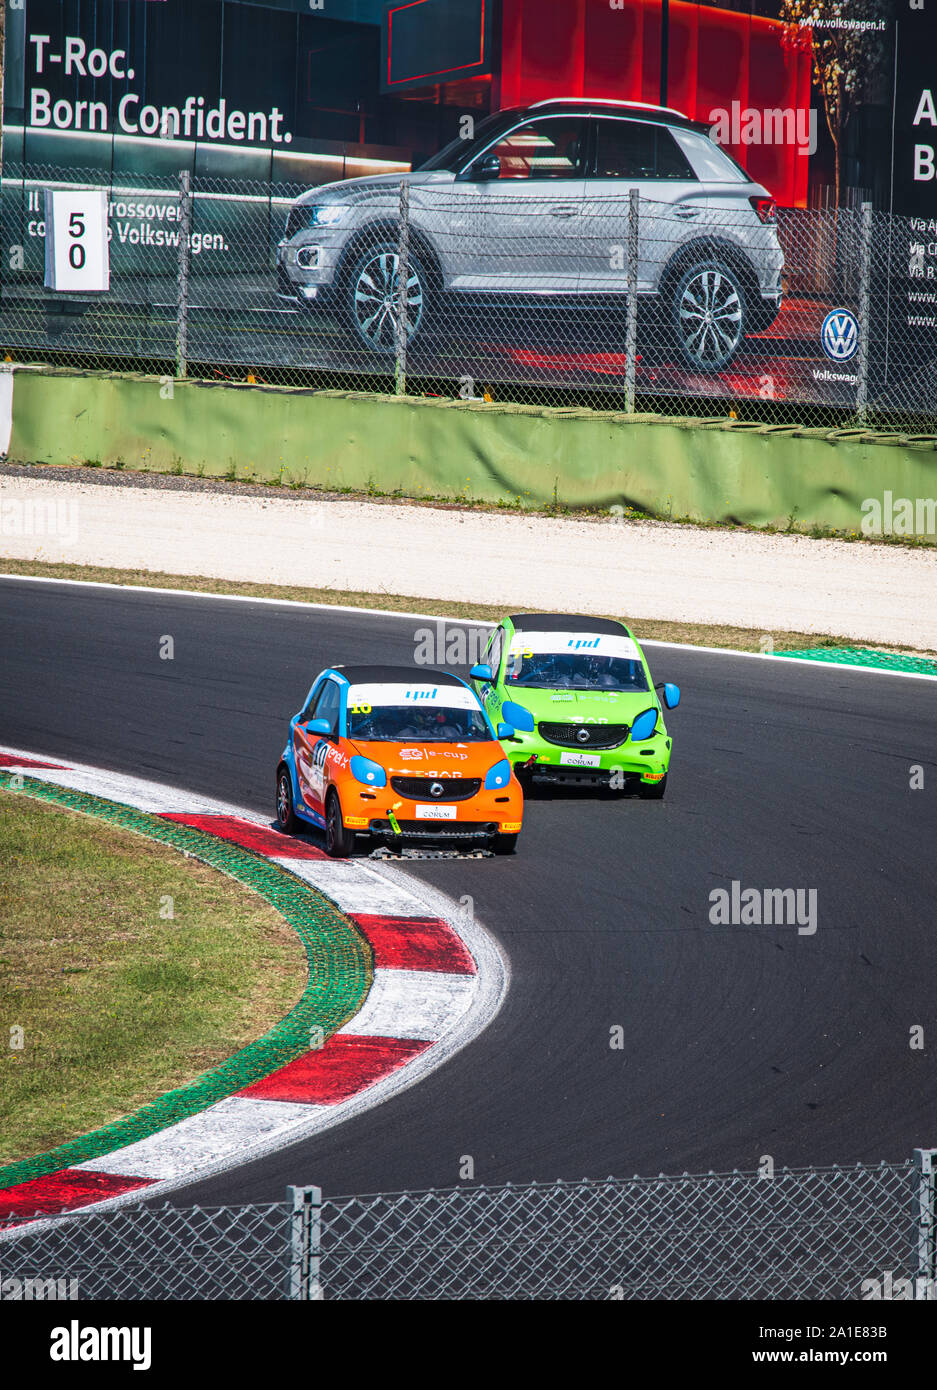 Vallelunga, Italy september 14 2019. High angle view of asphalt circuit with two Smart electric engine racing car in overtaking  action during the rac Stock Photo